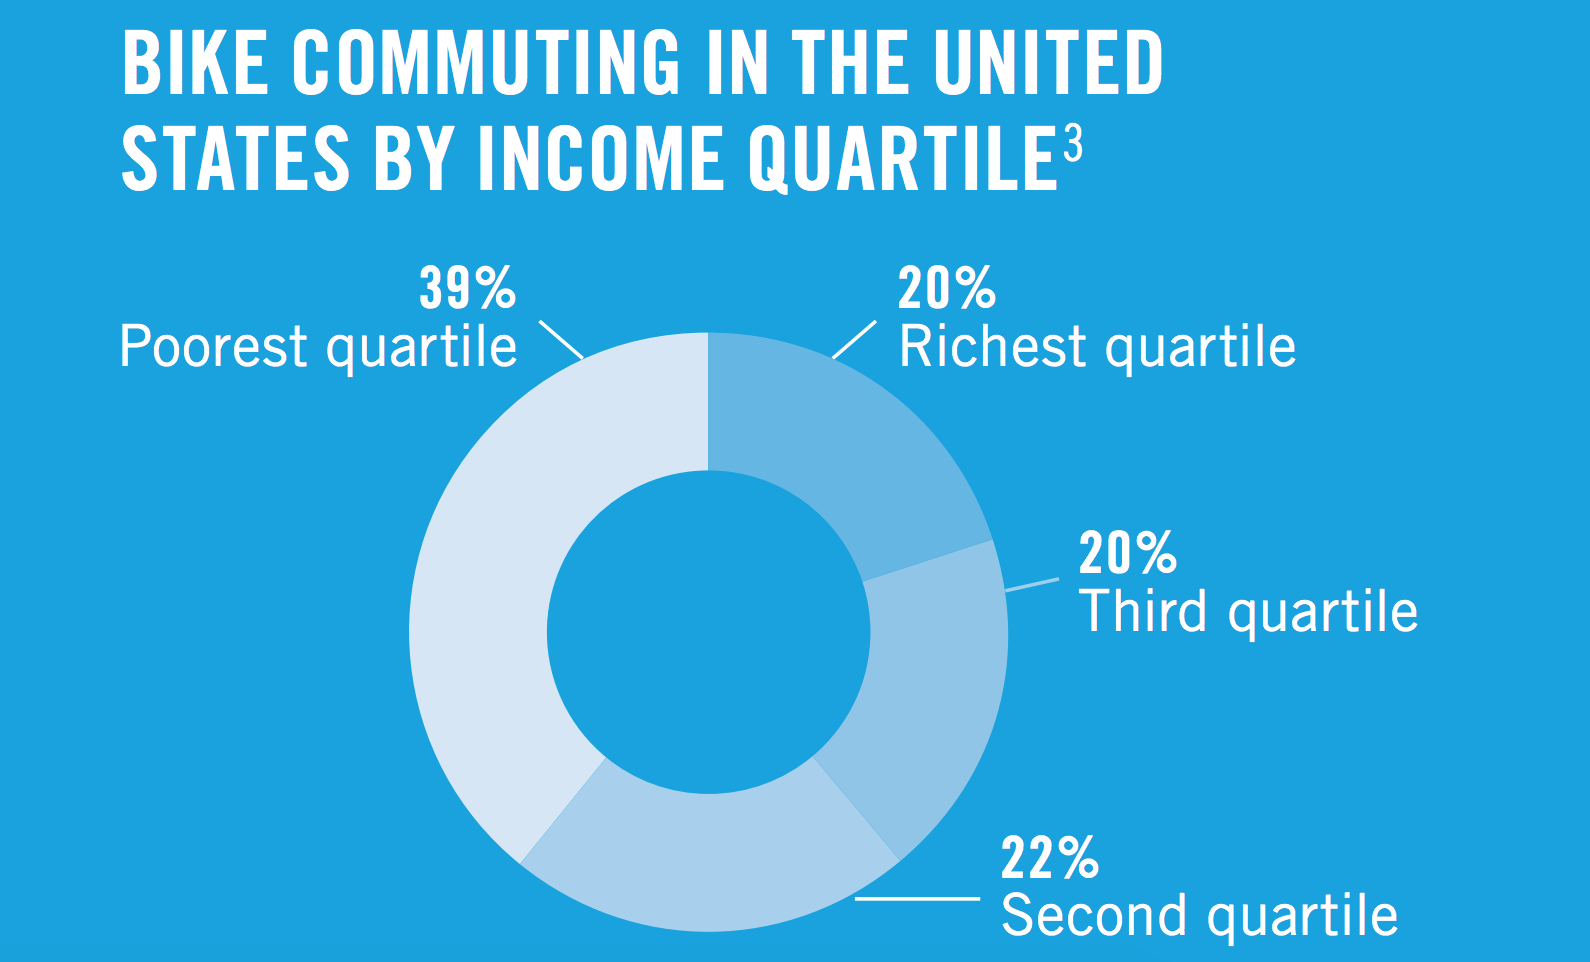 Bike commuting in the United States by income quartile